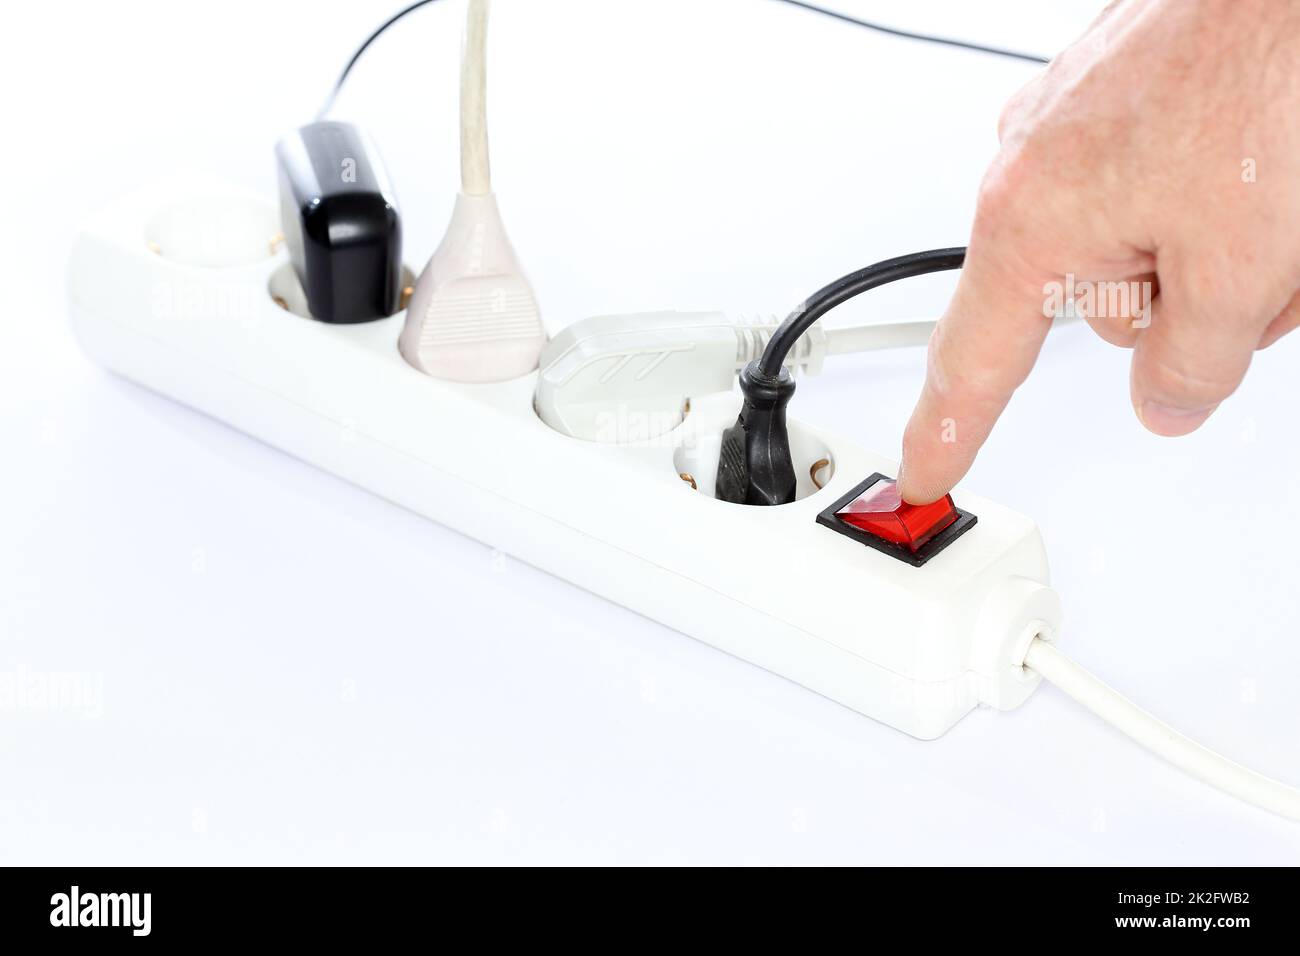 saving energy with finger is switching off a device Stock Photo